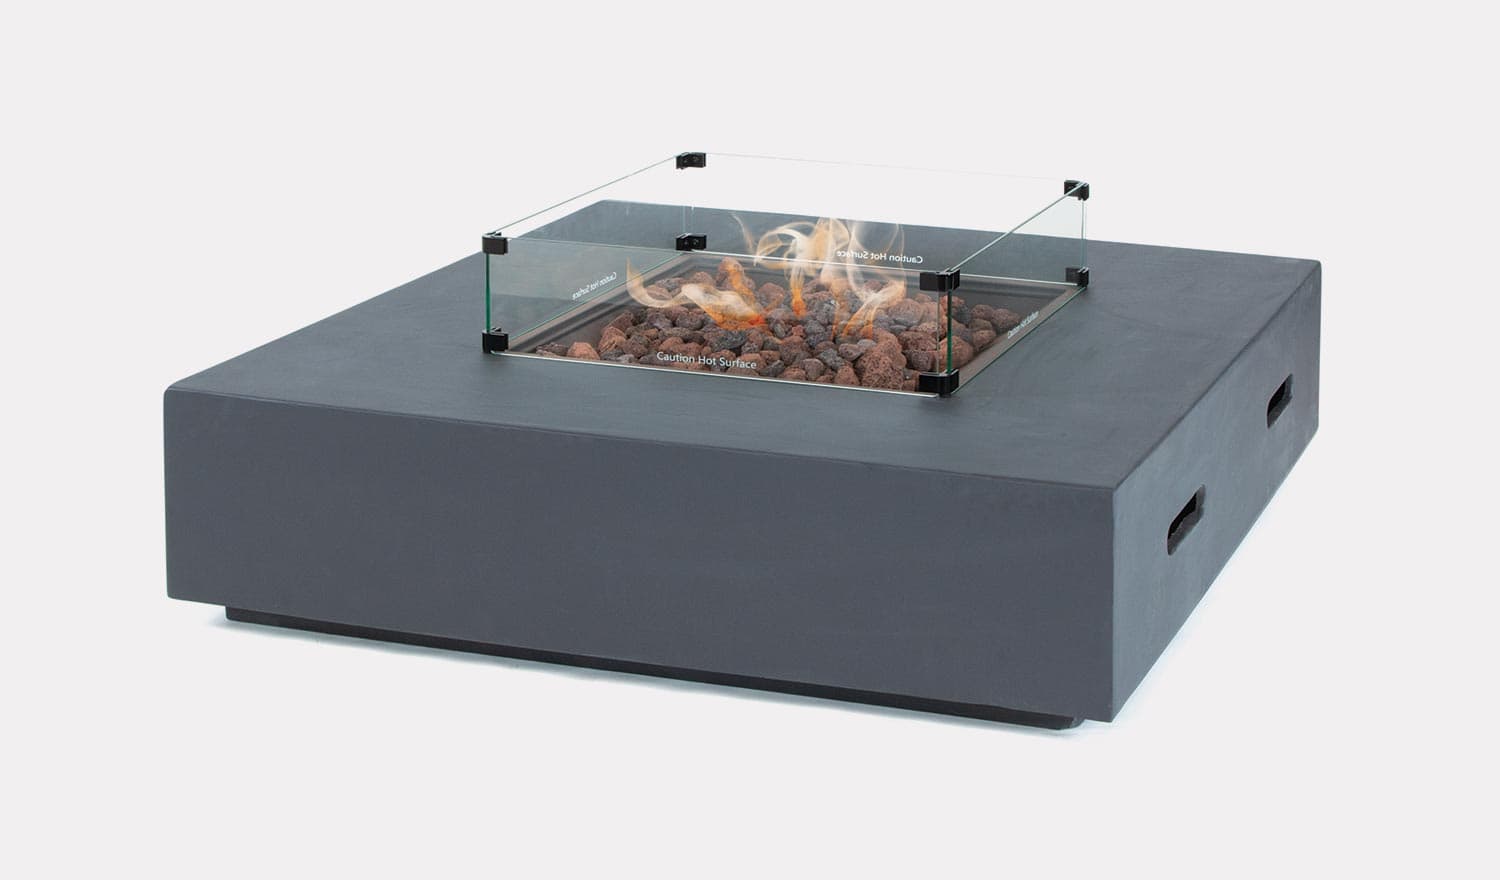 Universal Fire Pit Coffee Table 105cm, Tabletop Fire Pit